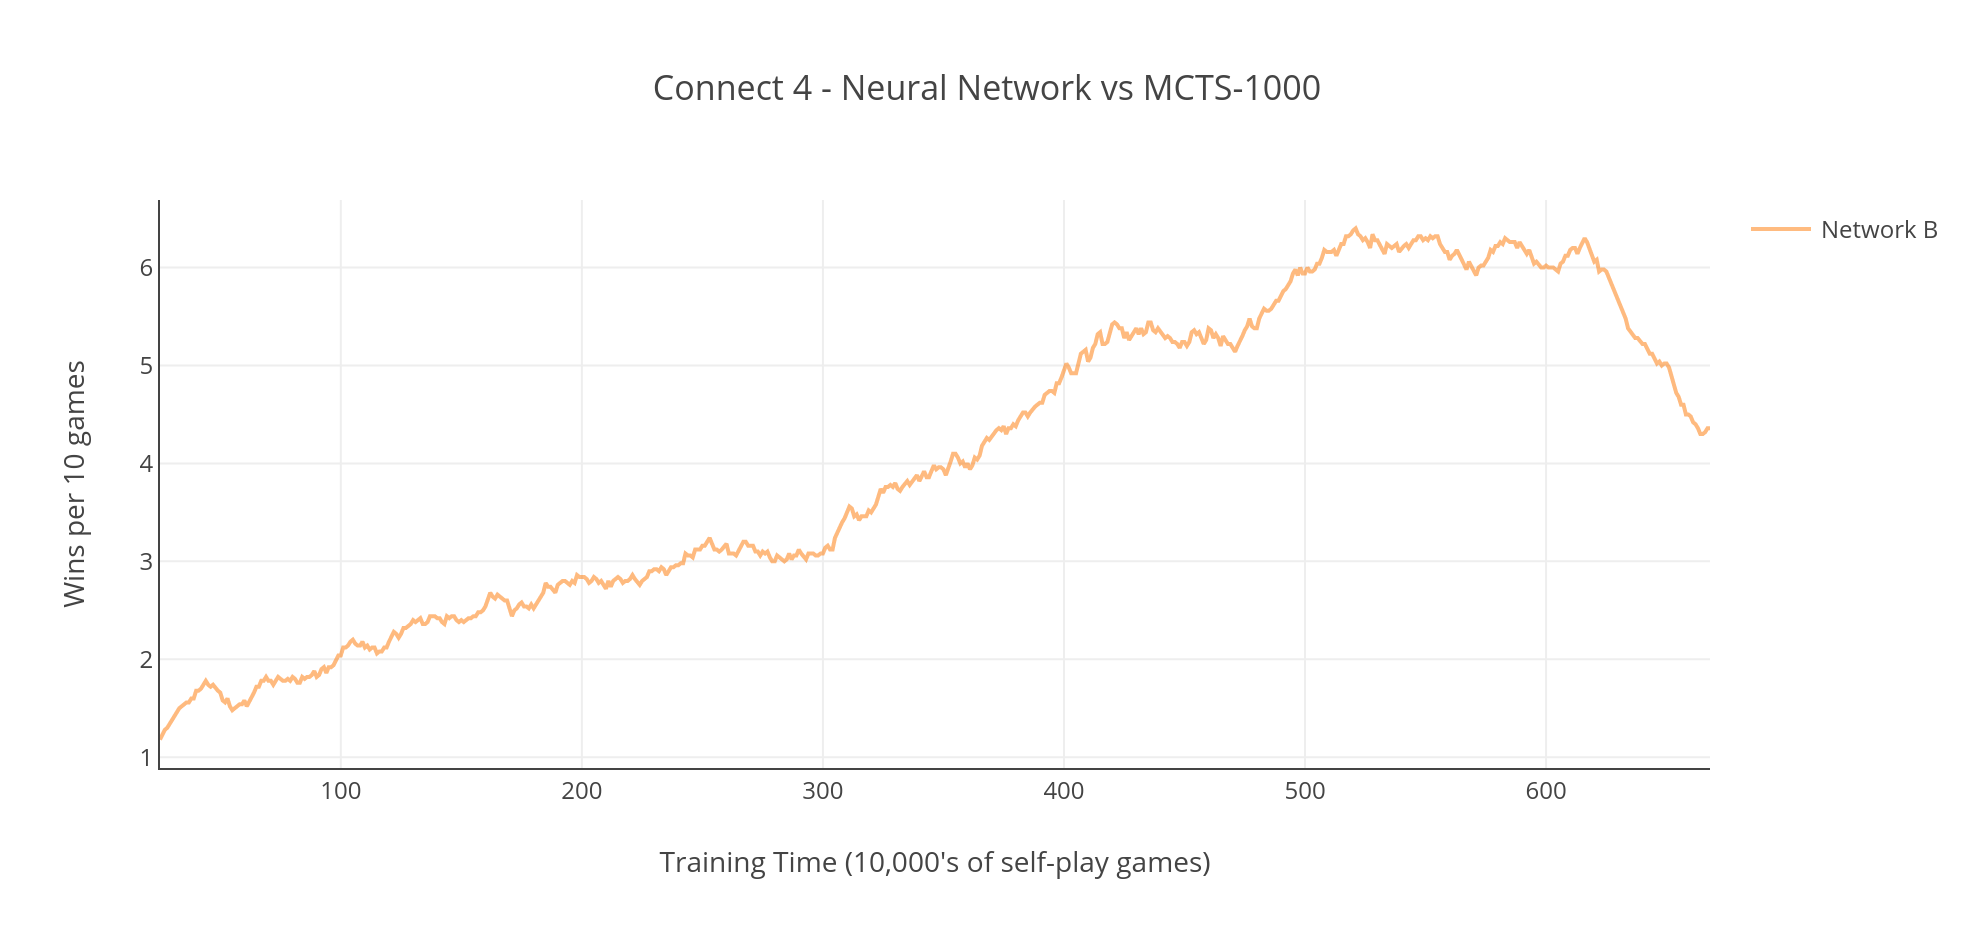 Graph showing a Neural Network overfitting when playing against a MCTS-1000 Player in a game of Connect 4